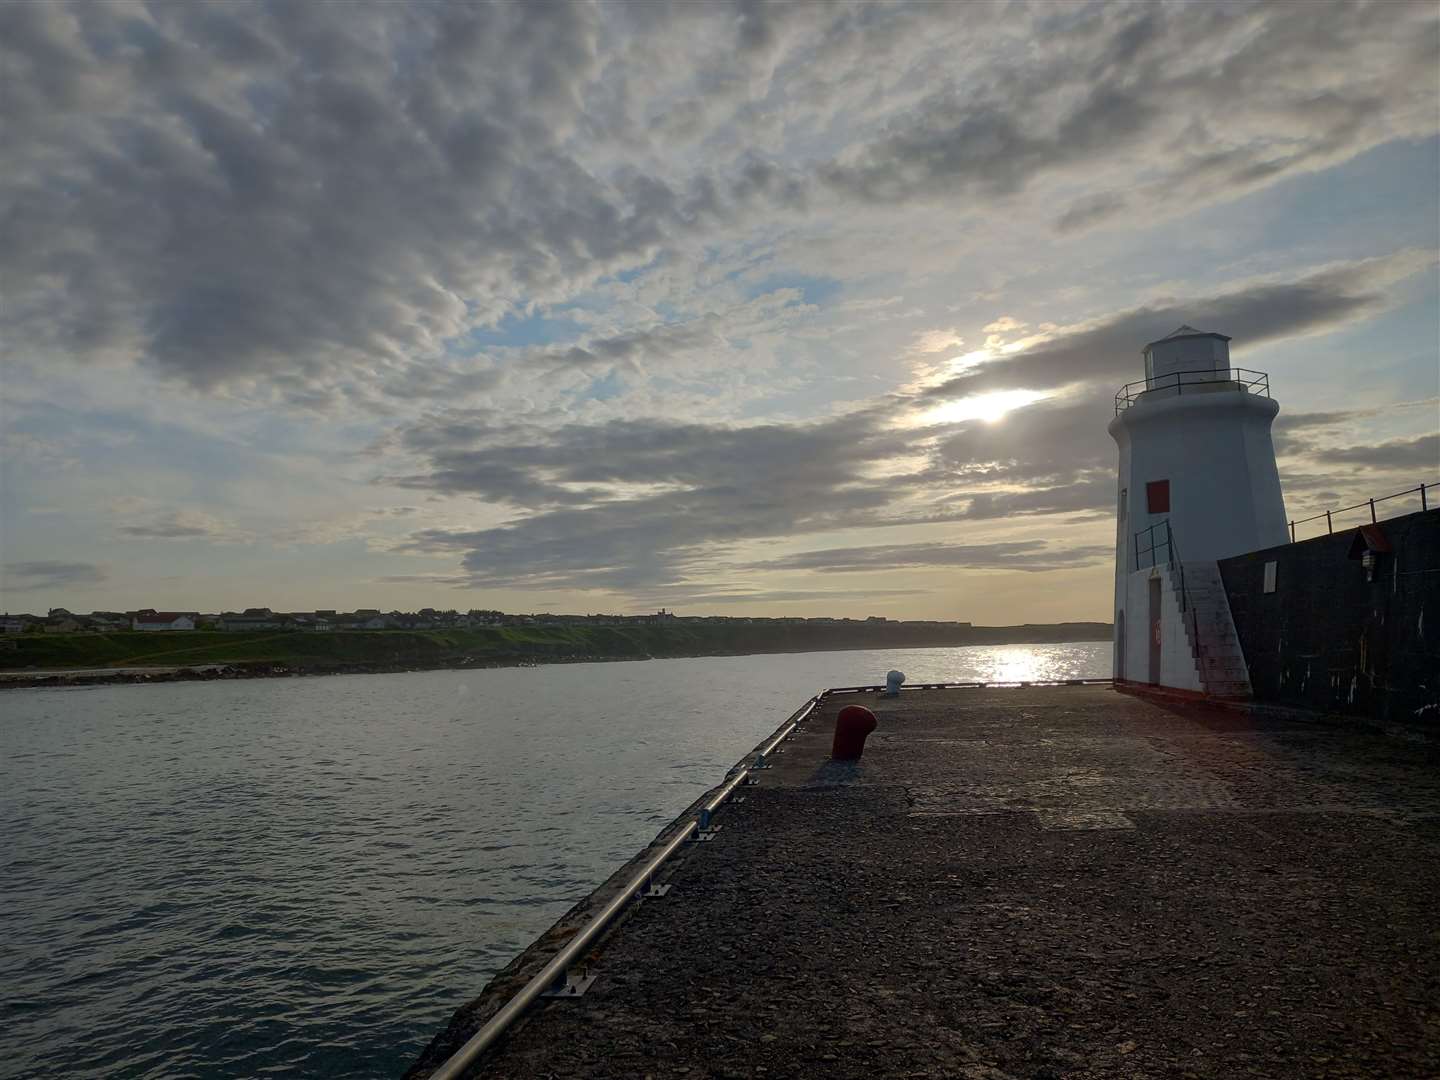 A shot from around the harbour at Wick taken by Matthew Towe before the longest day in June.